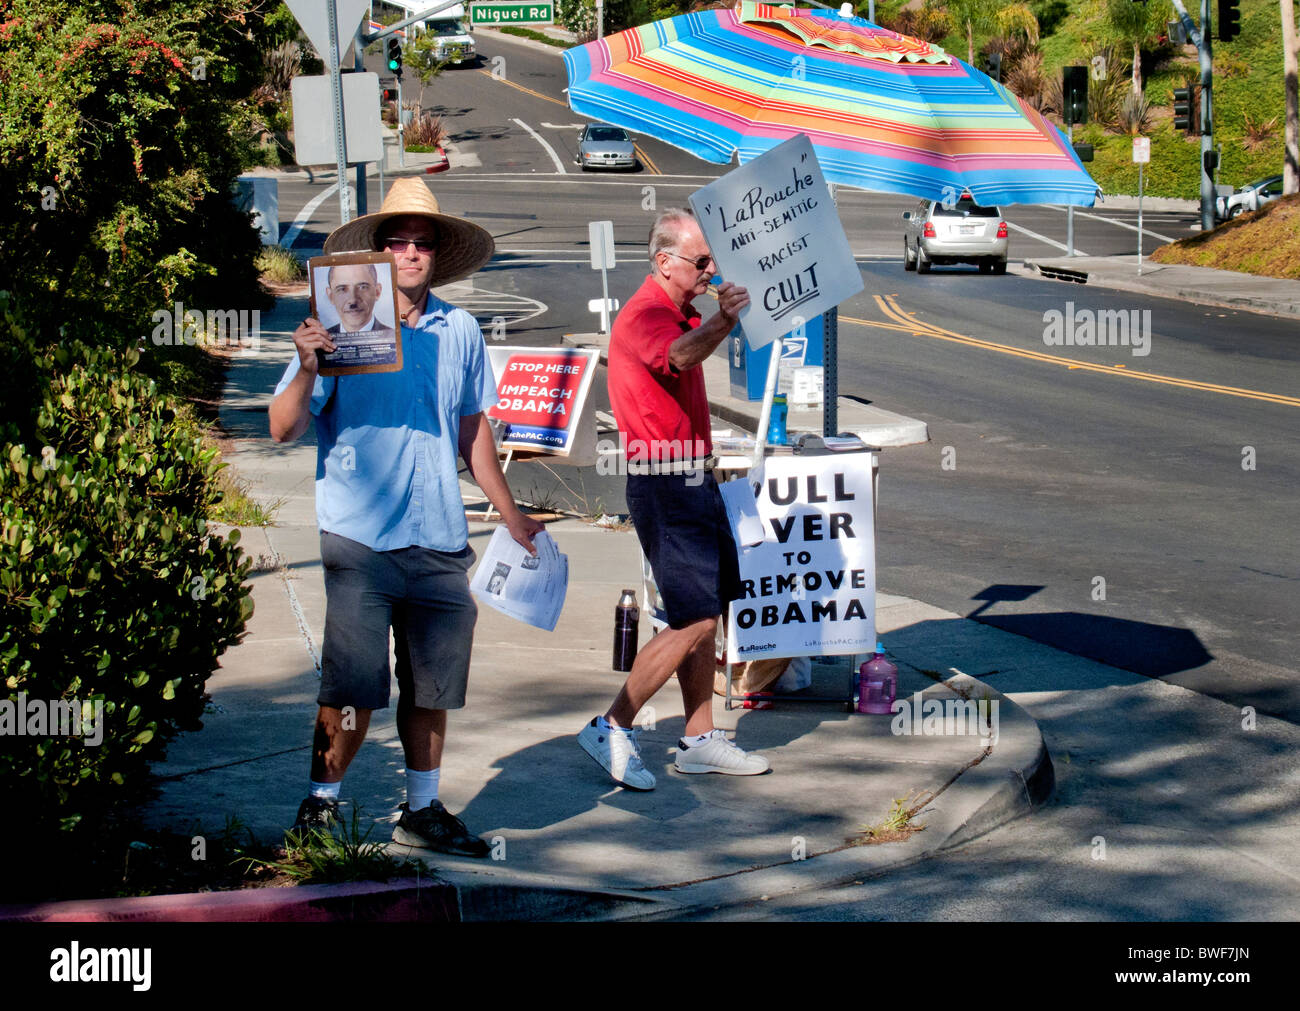 Activist seeks the impeachment of US President Obama while a counter demonstrator has sign denouncing activist's organization. Stock Photo